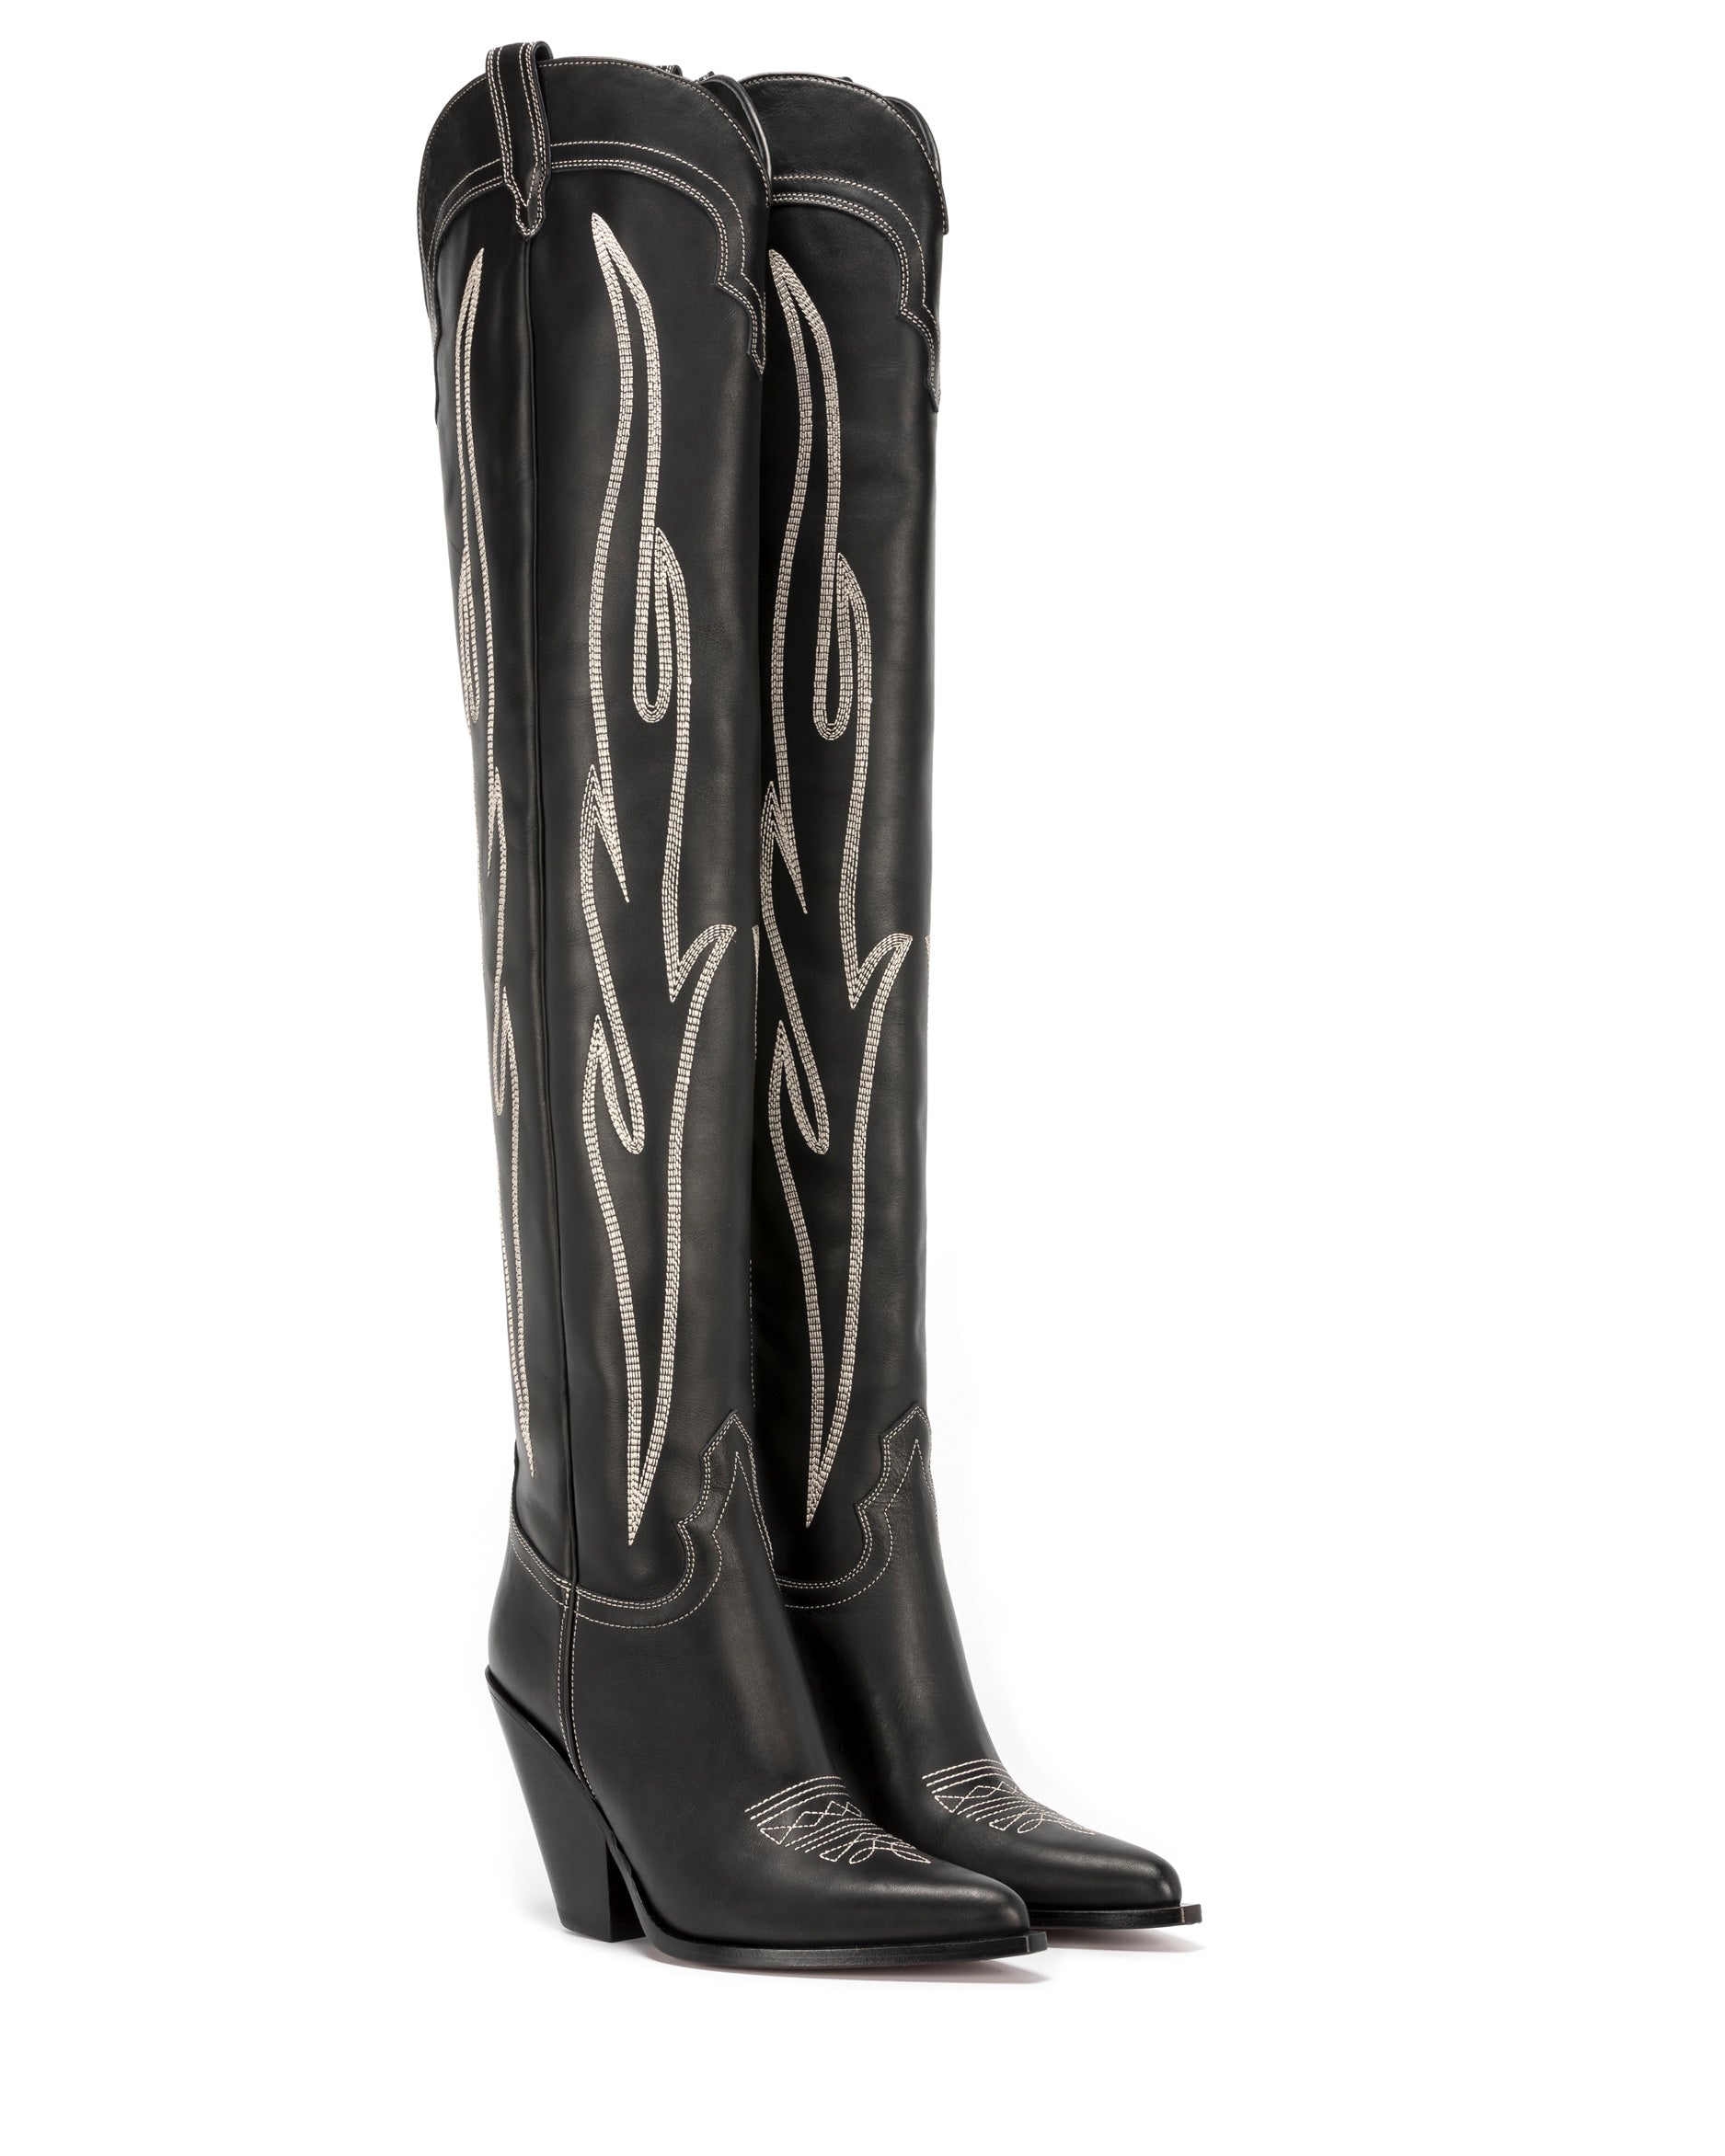    HERMOSA-90-Women_s-Over-The-Knee-Boots-in-Black-Calfskin-Off-White-Embroidery_02_Front